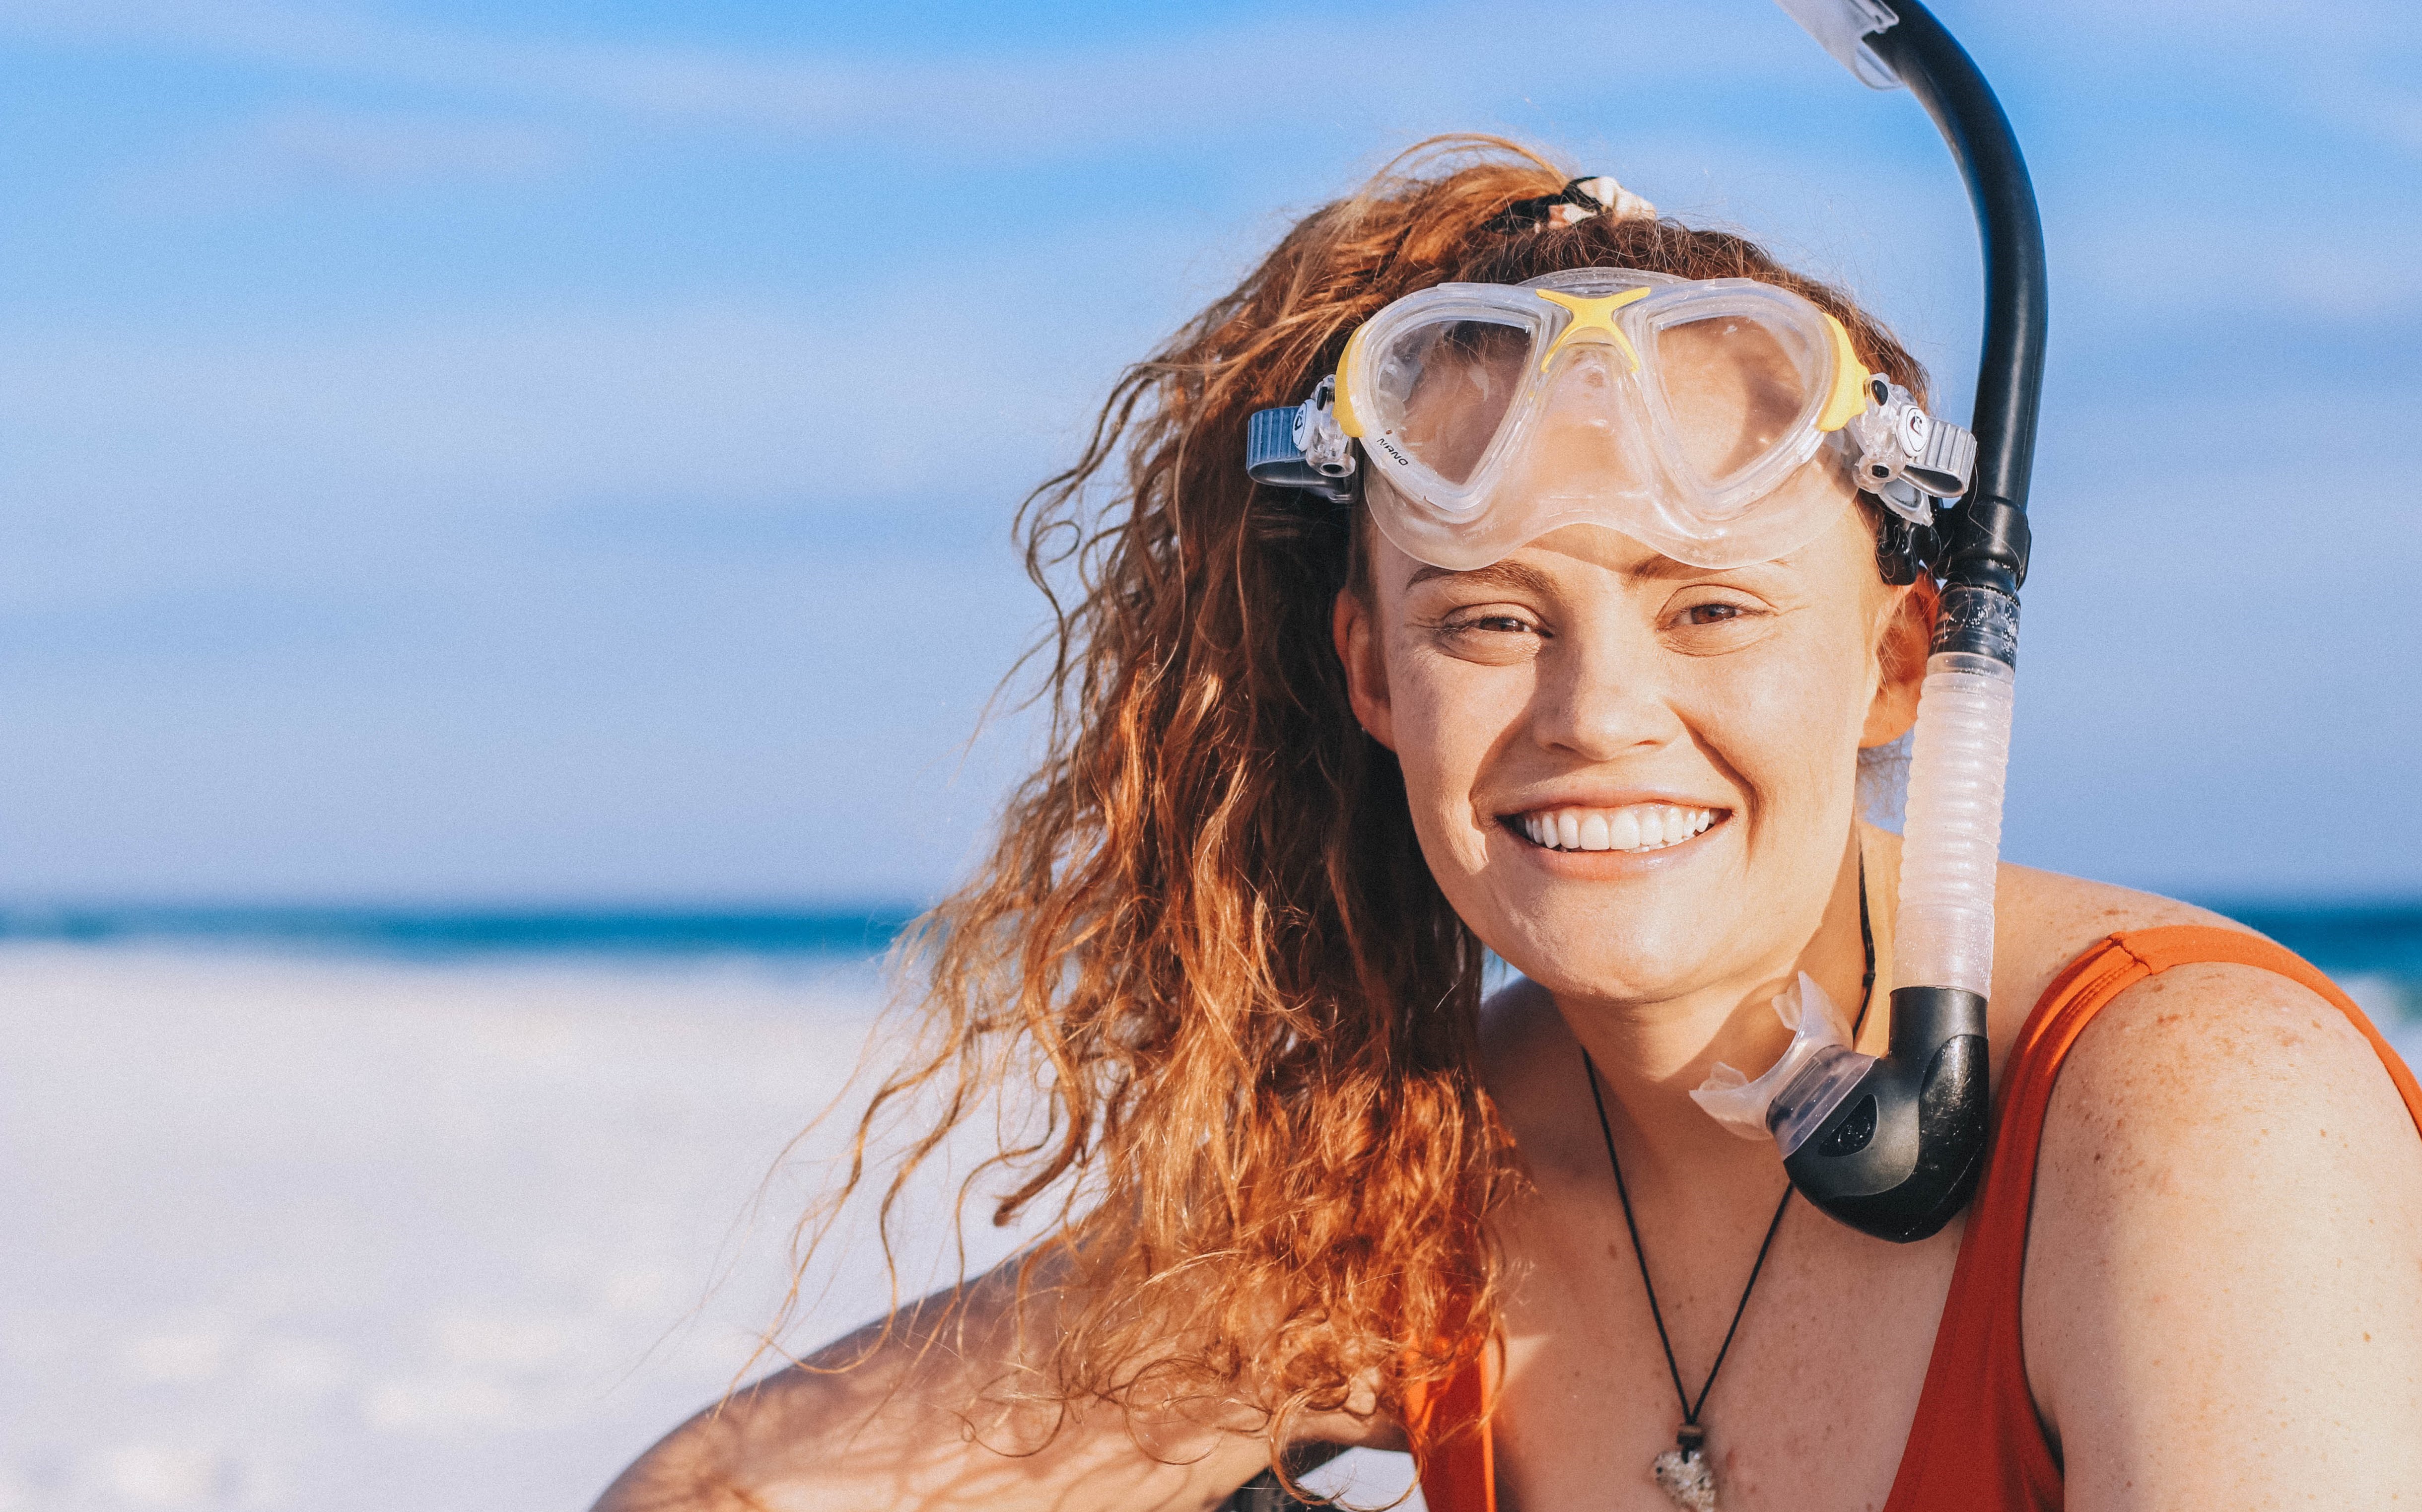 Woman with snorkel on her head smiling at the camera; beach in background.